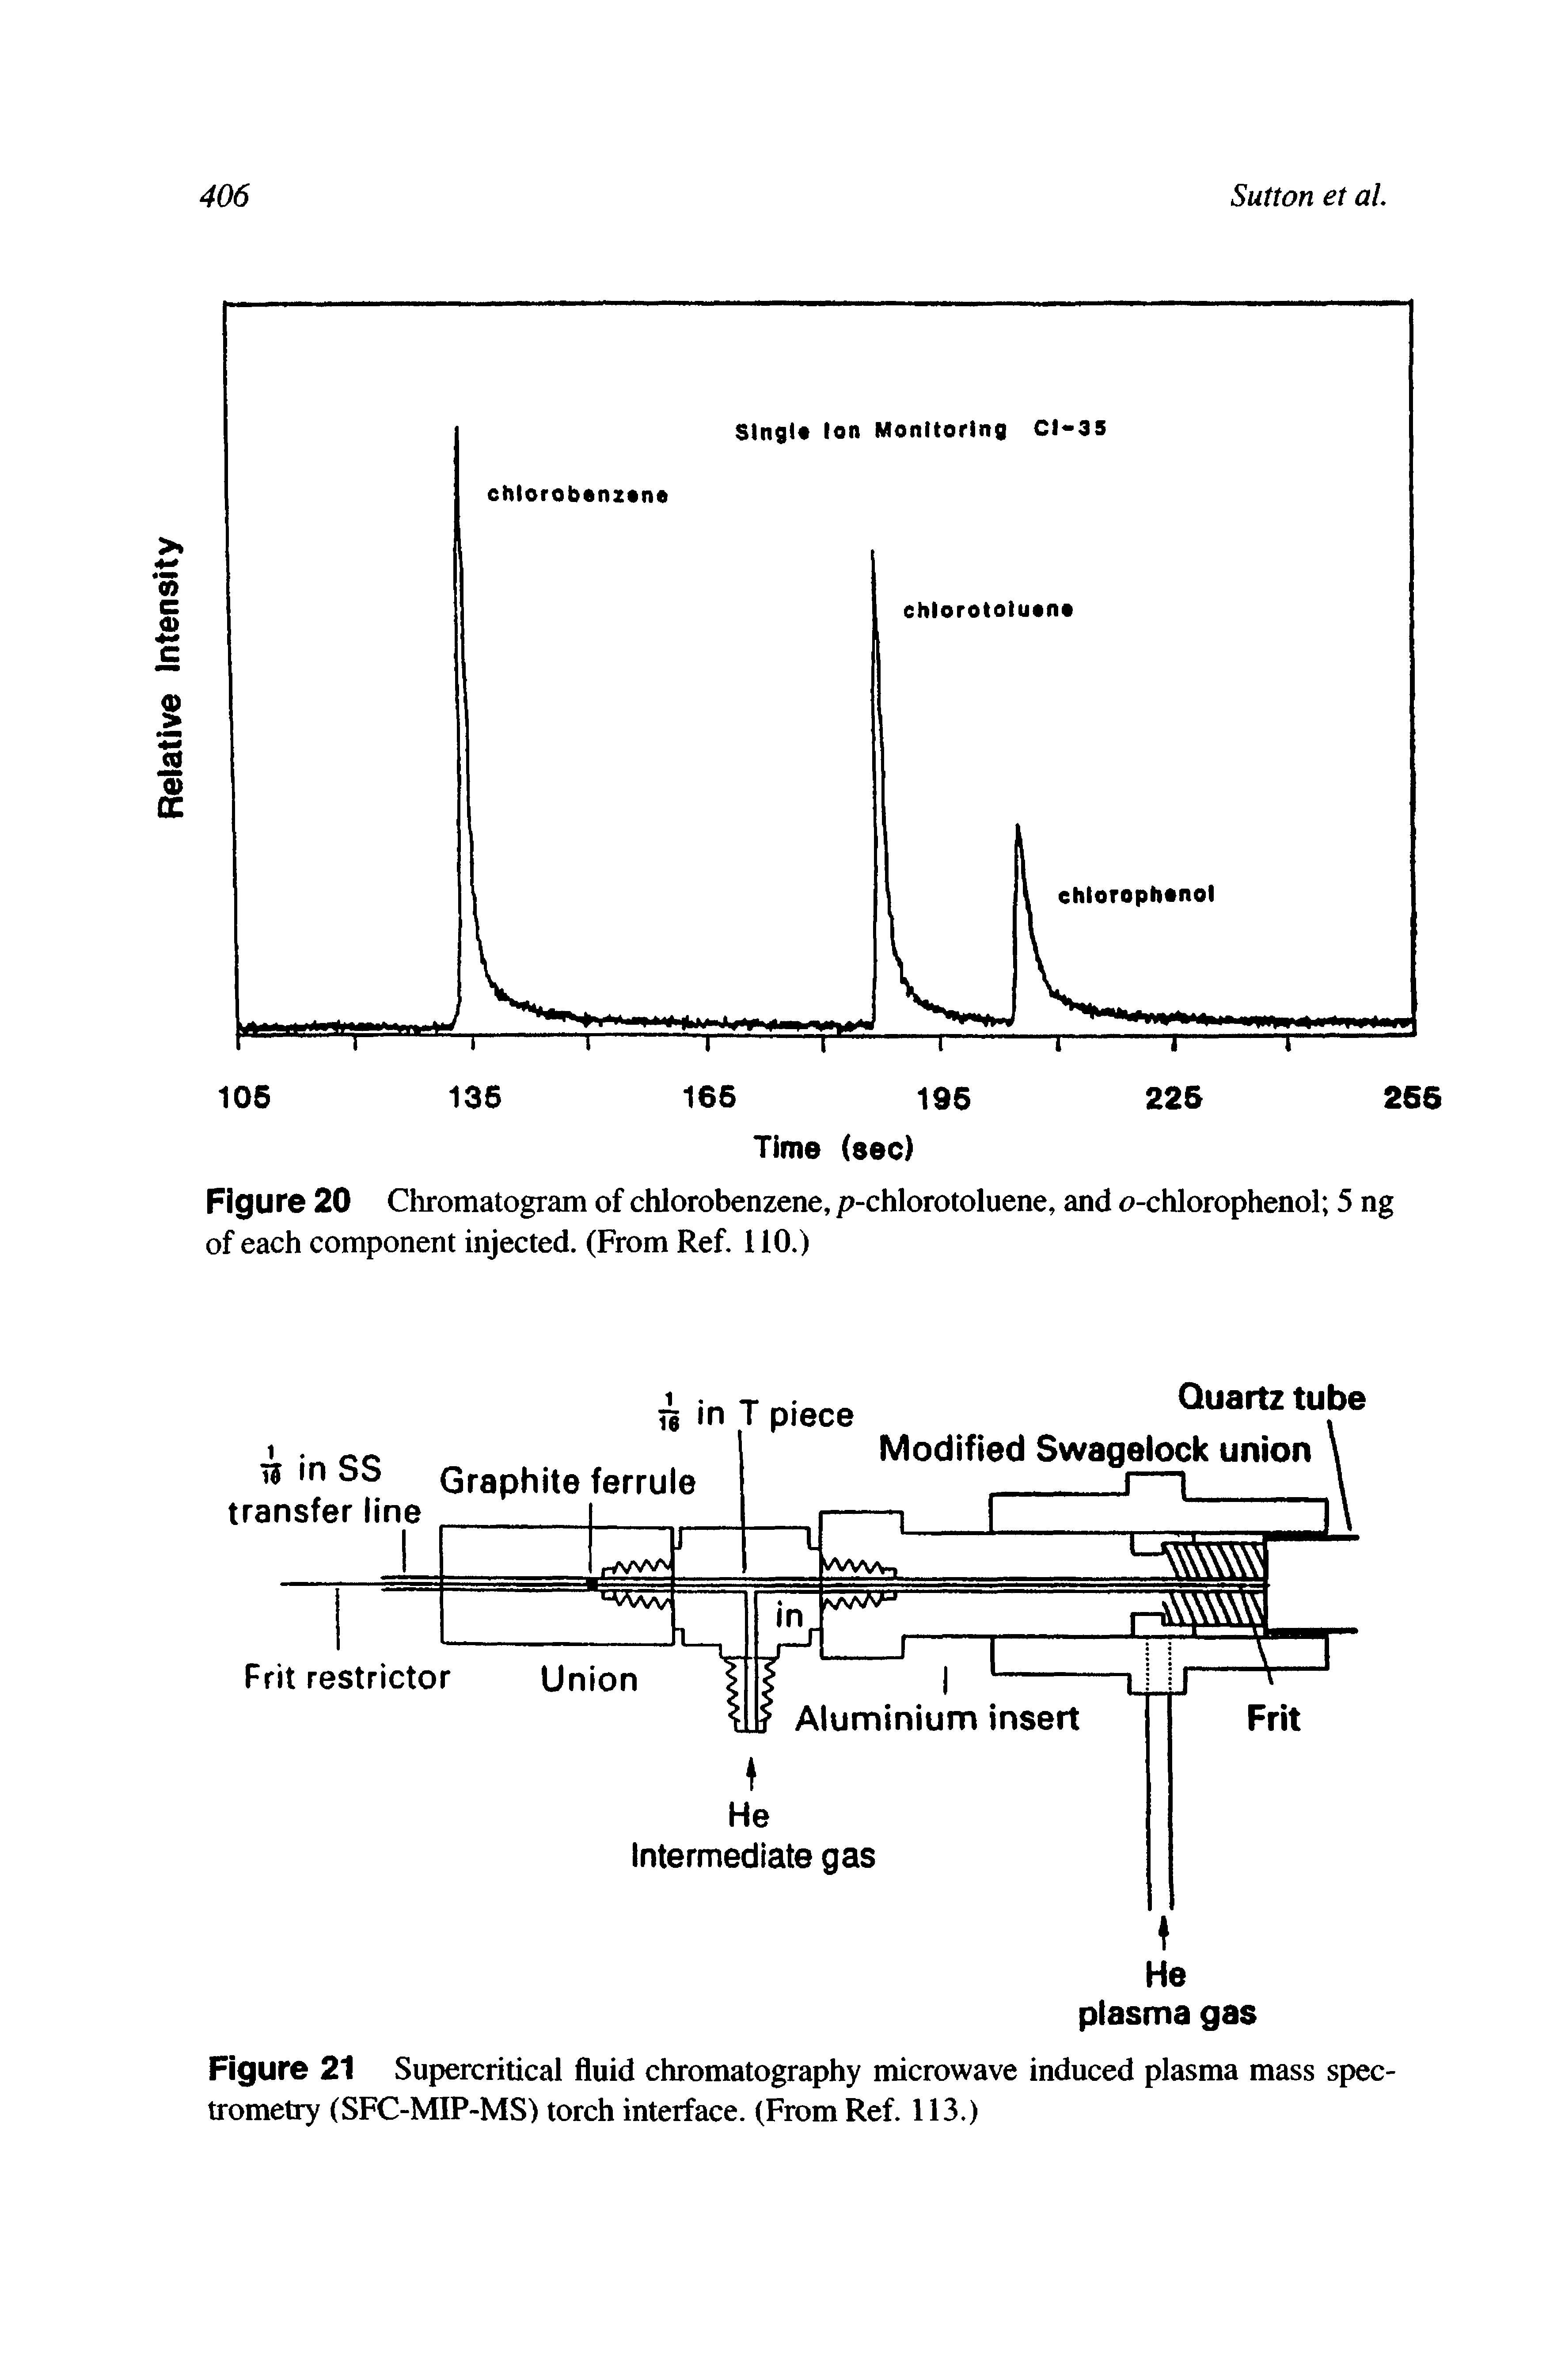 Figure 21 Supercritical fluid chromatography microwave induced plasma mass spectrometry (SFC-MIP-MS) torch interface. (From Ref. 113.)...